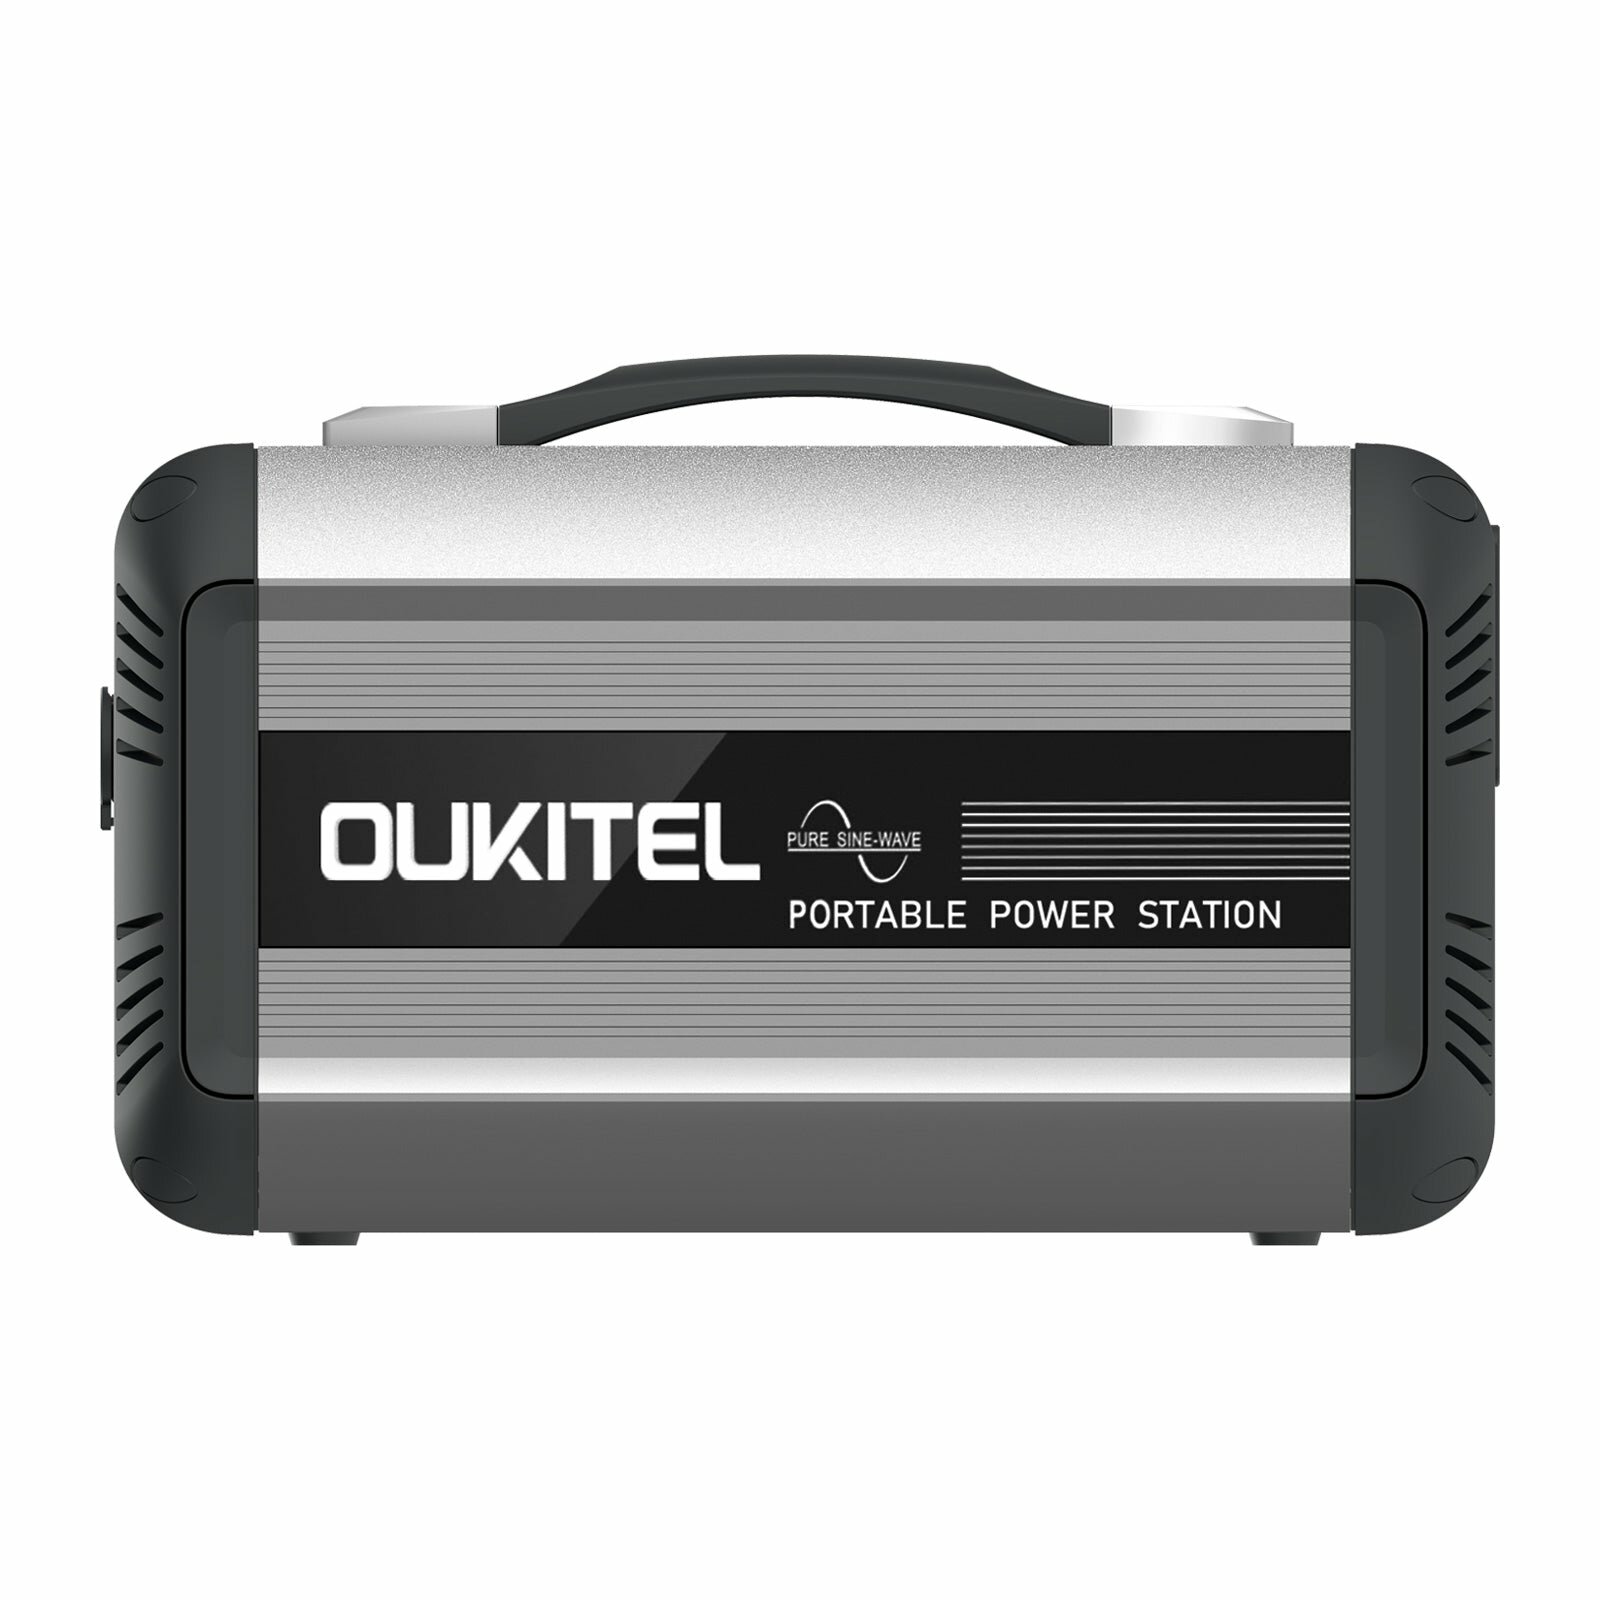 [EU Direct] OUKITEL CN505 614Wh 500W Portable Power Station LiFePO4 Lithium Iron Battery Back with 10 Versatile Outlets For Home Tool Outdoor Camping Devices